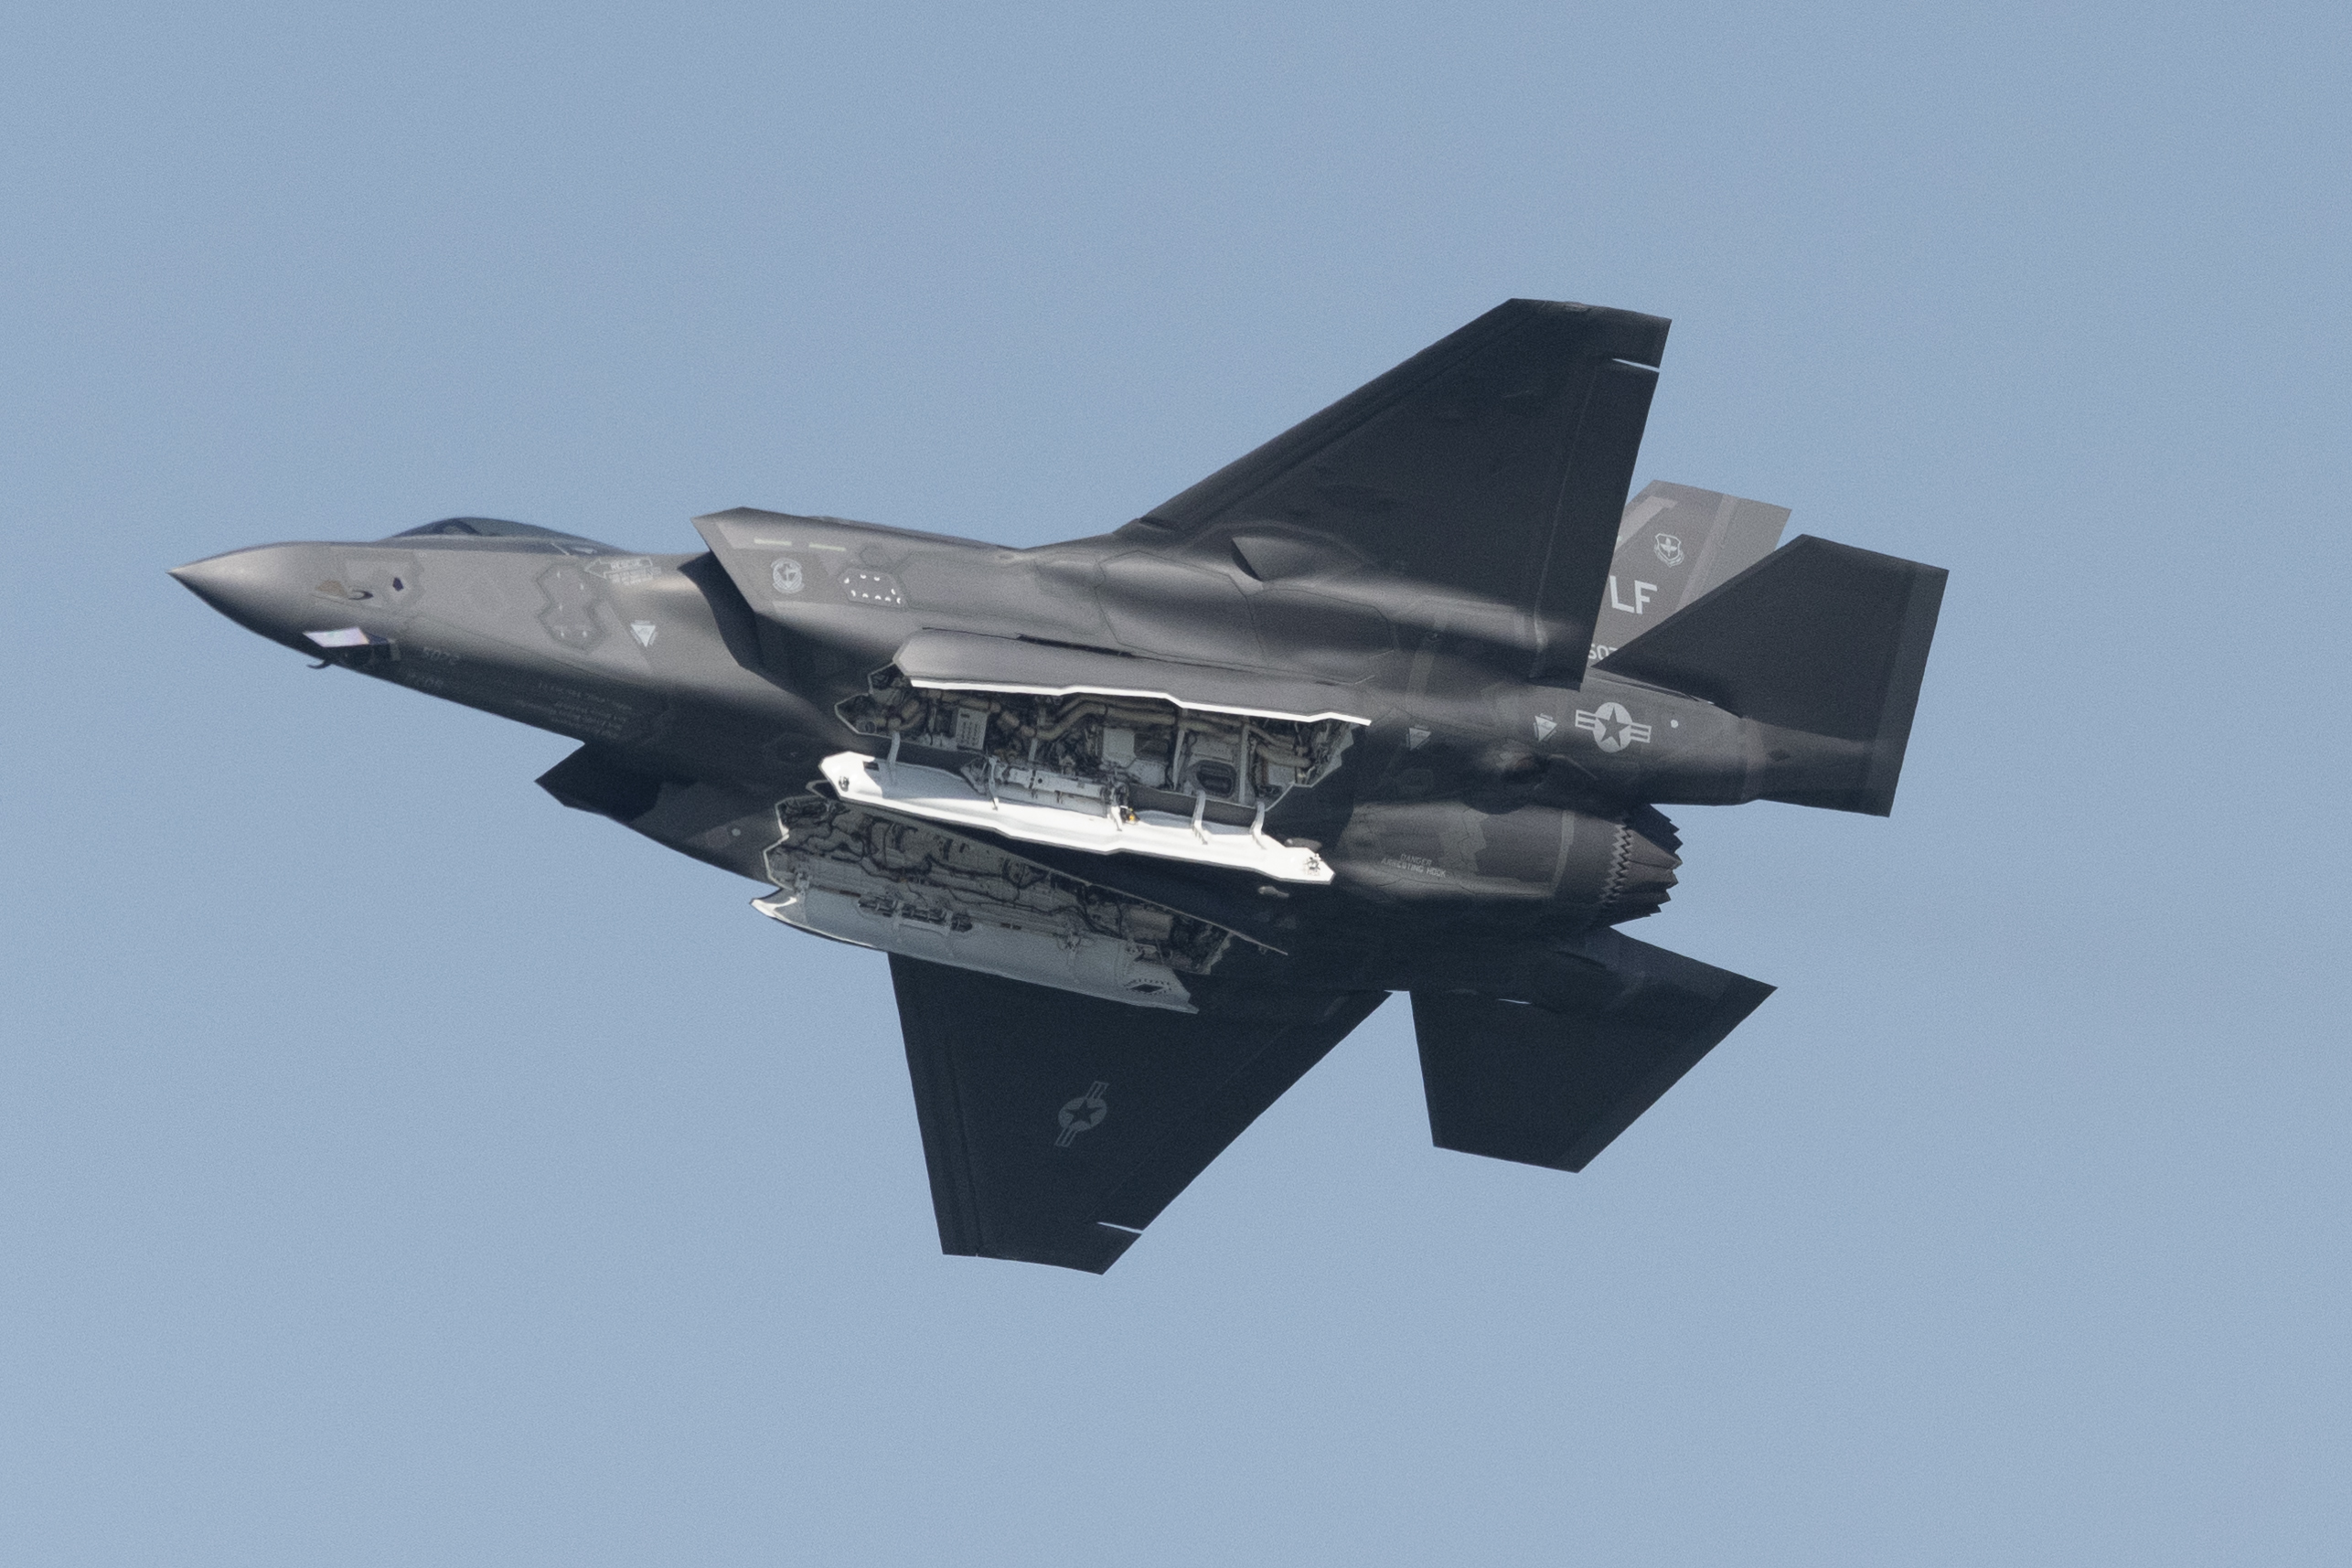 T he United States’ military is on the hunt for an F-35 fighter jet that has gone missing following an incident that forced the pilot to eject from 